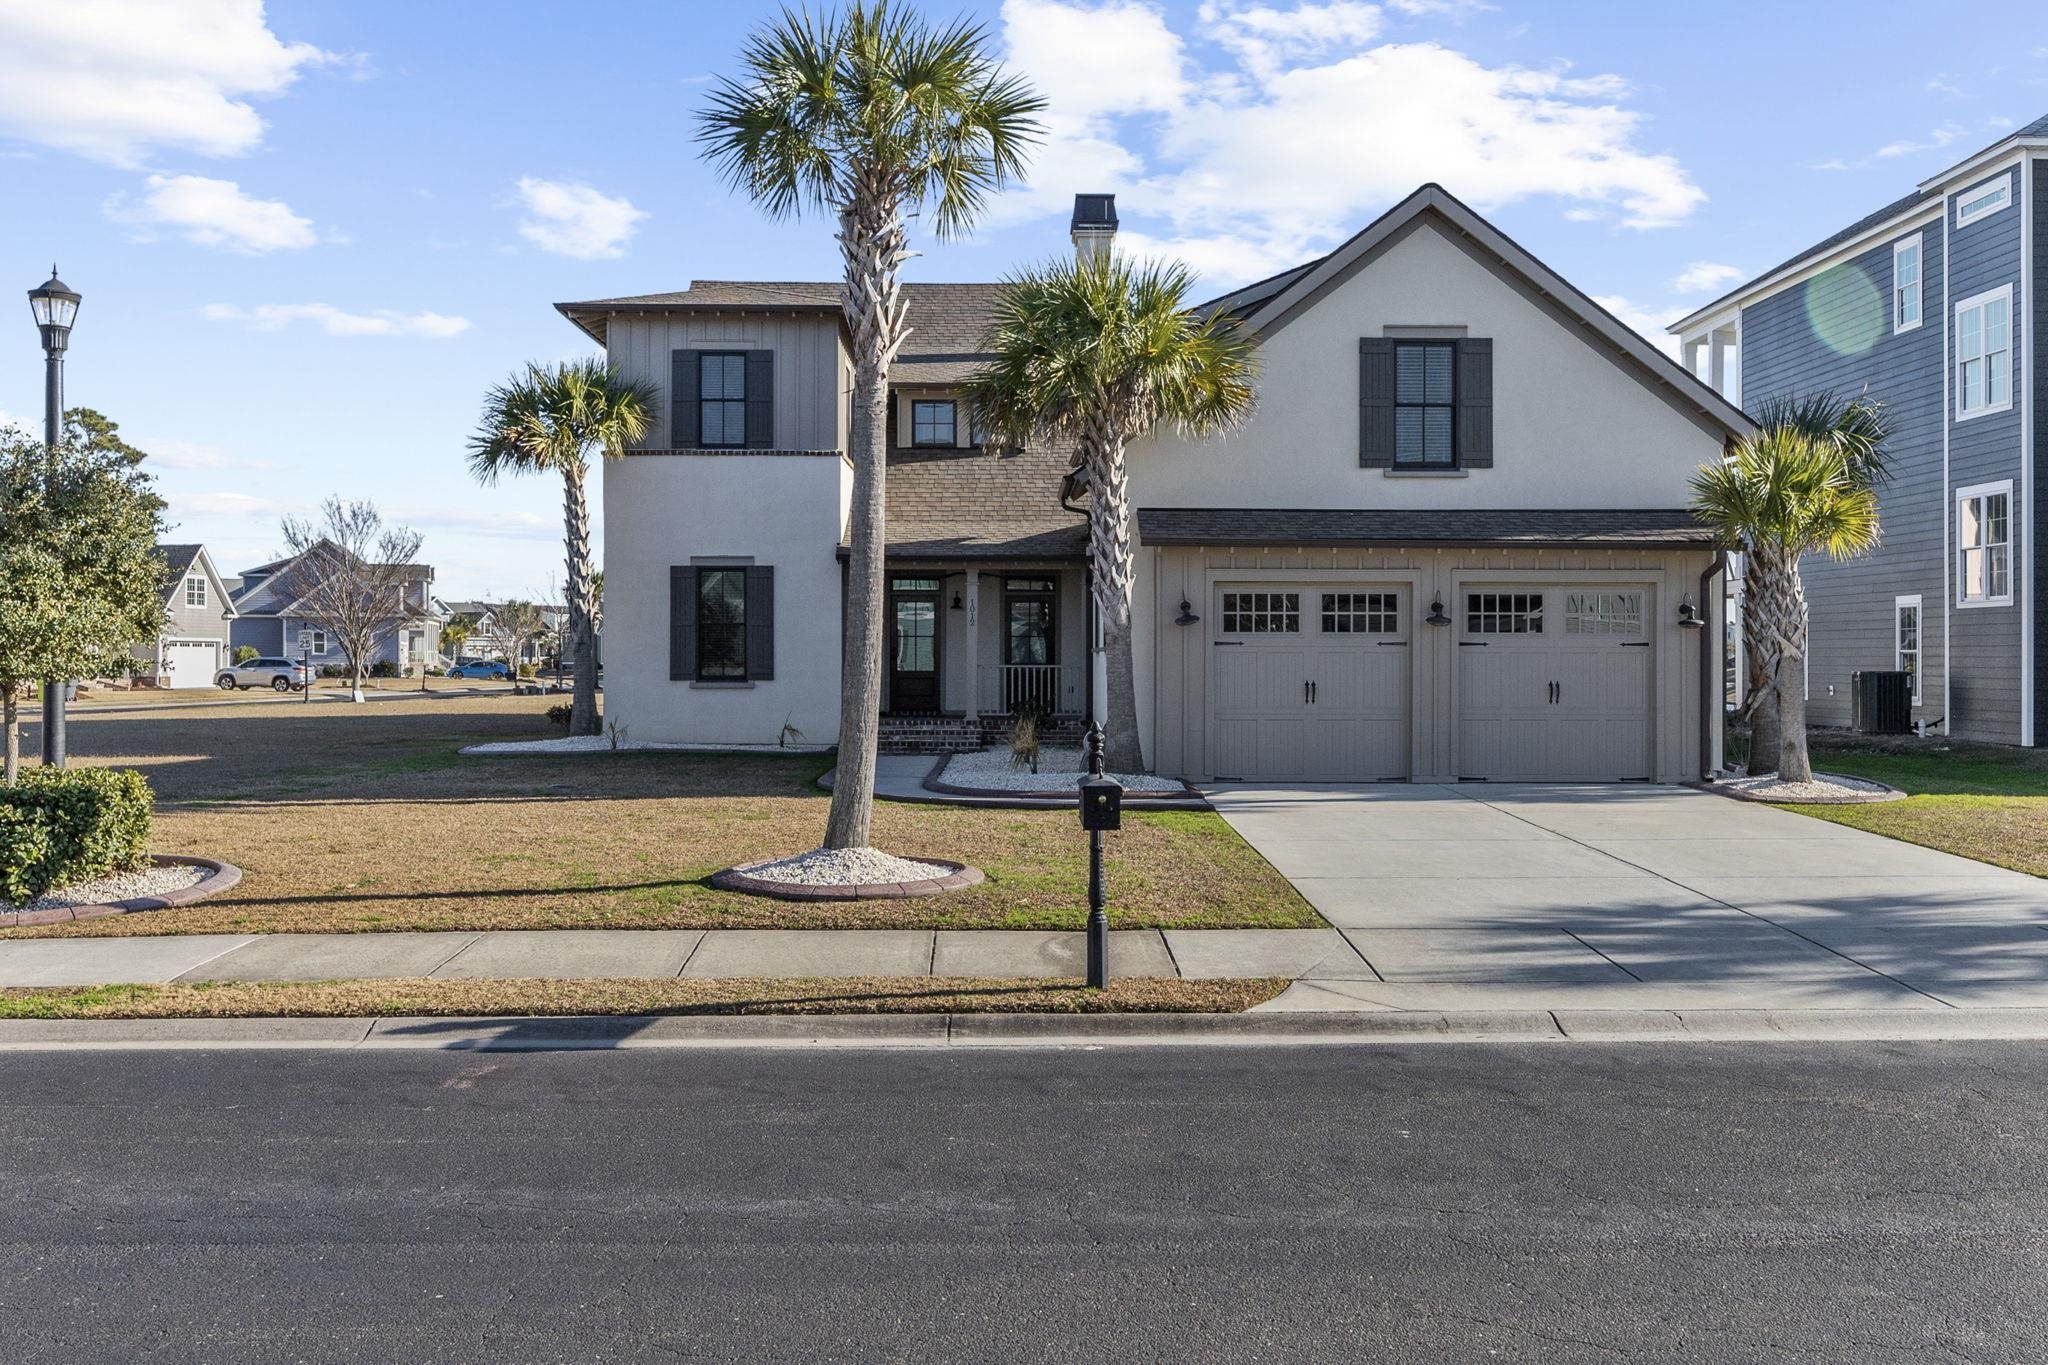 1012 East Isle of Palms Ave. Myrtle Beach, SC 29579